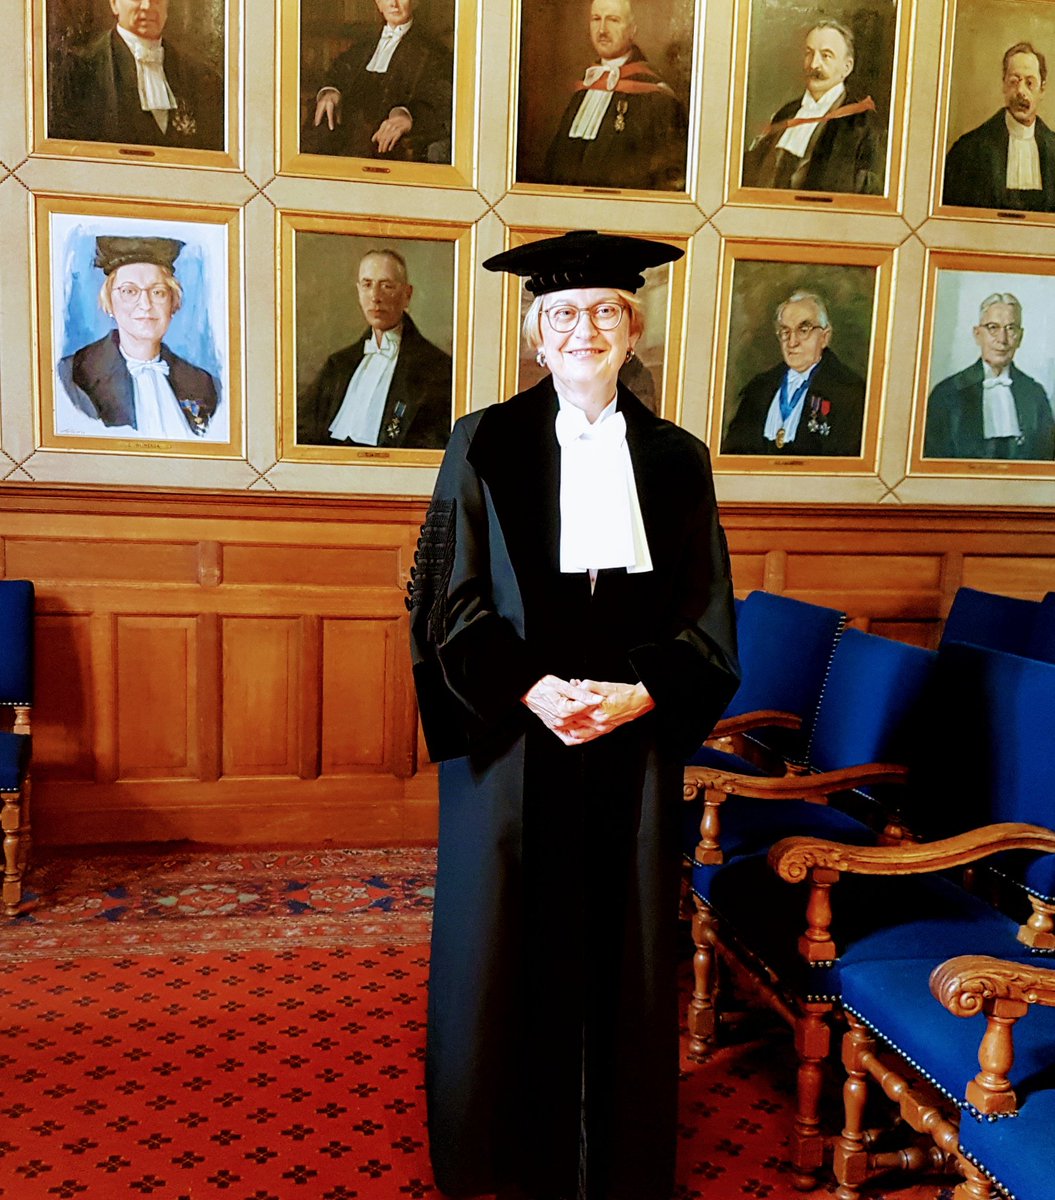 Rector Maginificus Cisca Wijmenga standing proudly next to her portrait up on the wall with all the other rectors.